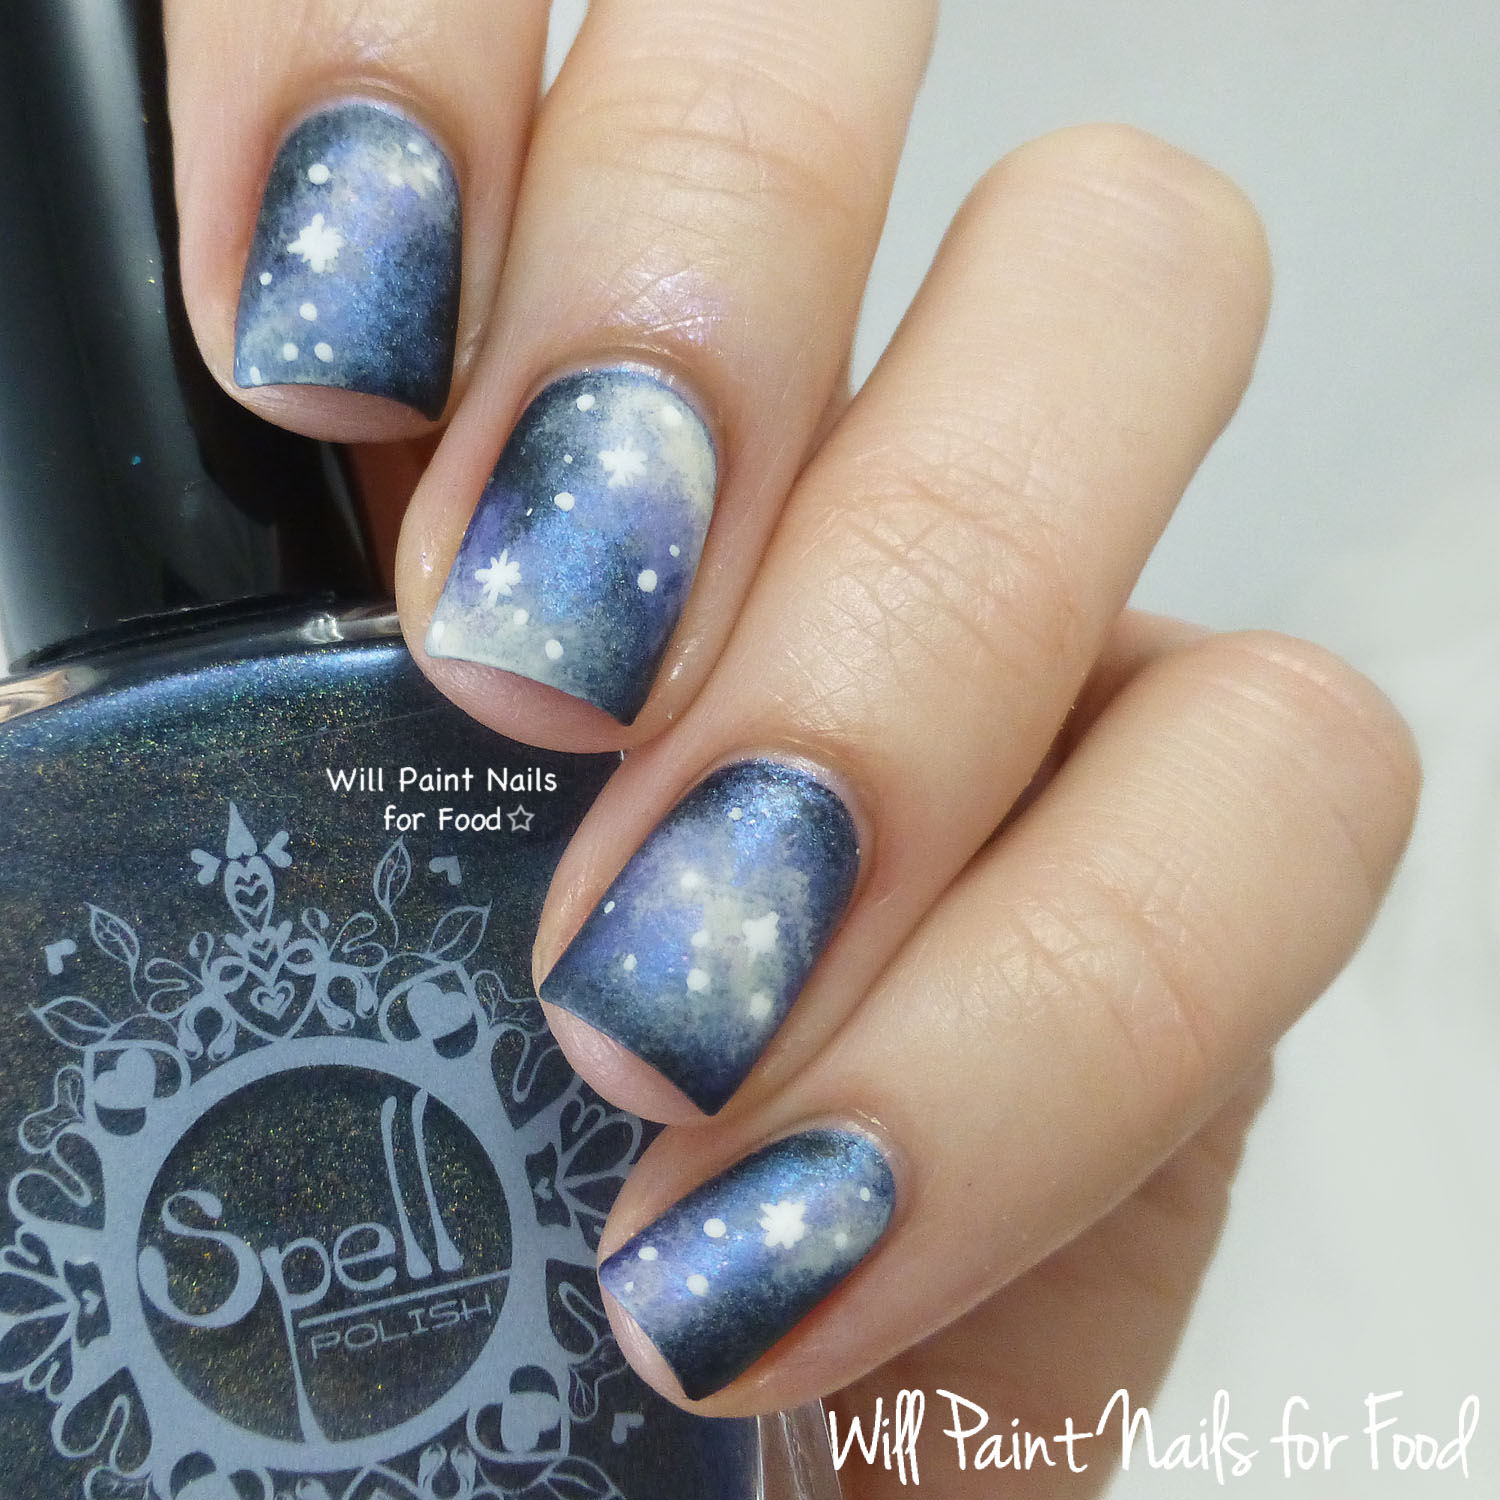 Galaxy Nails with Spell Polish